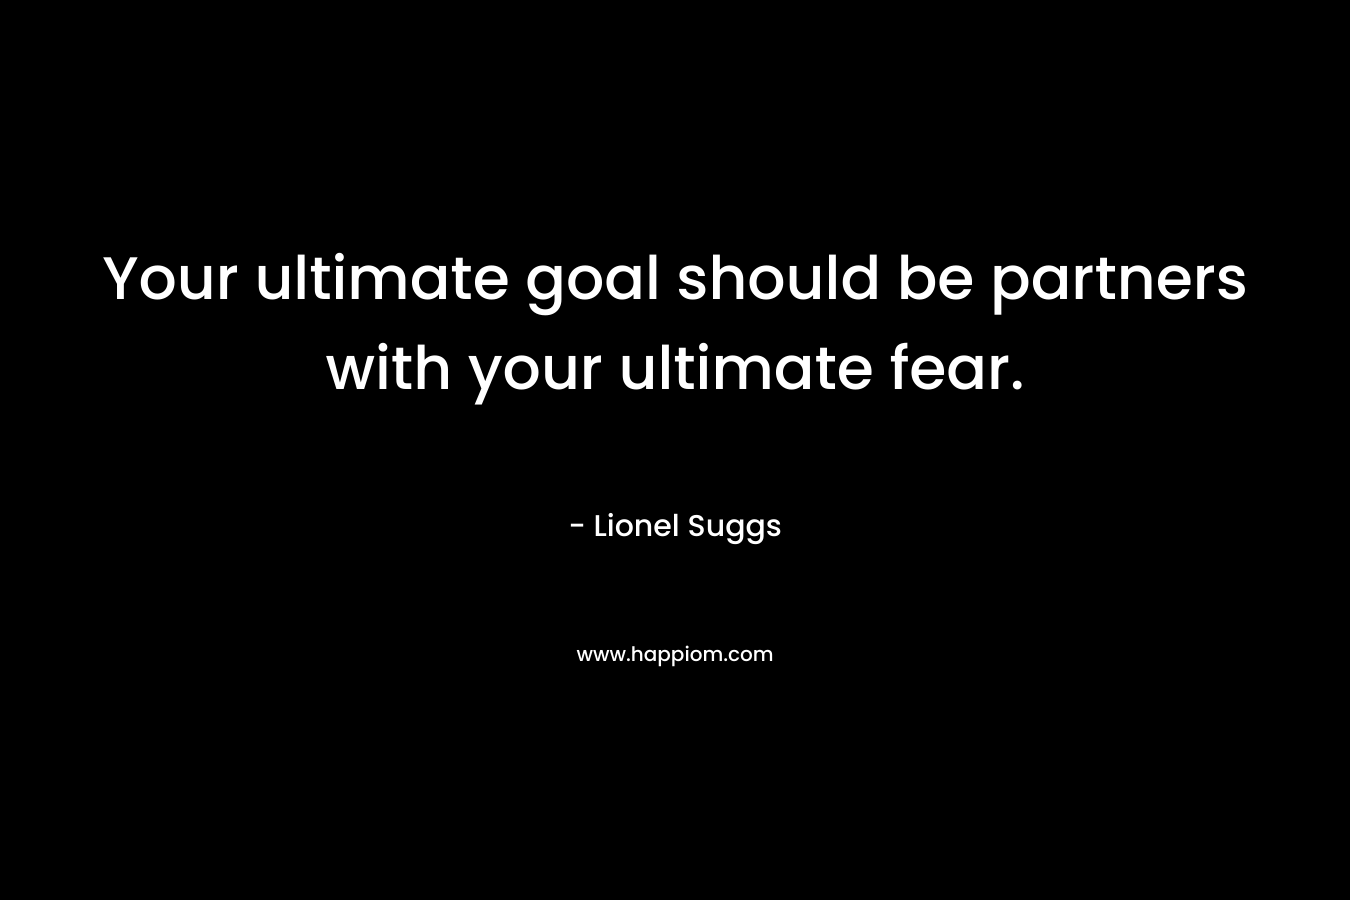 Your ultimate goal should be partners with your ultimate fear.